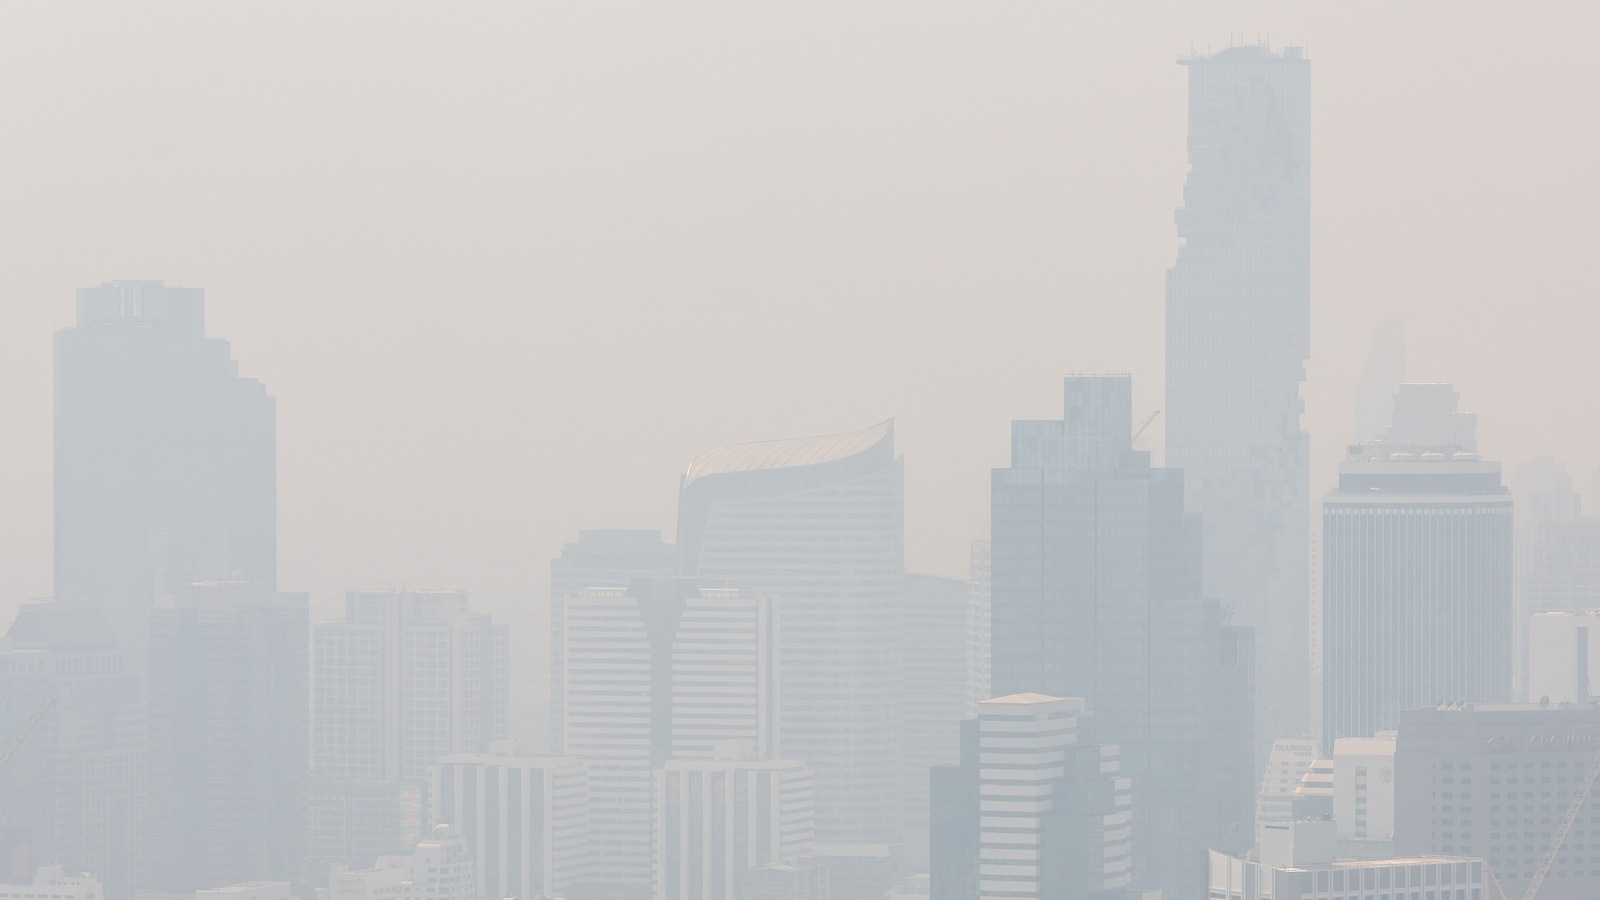 This country has advised people to stay indoors amid ‘eye-burning’ air pollution